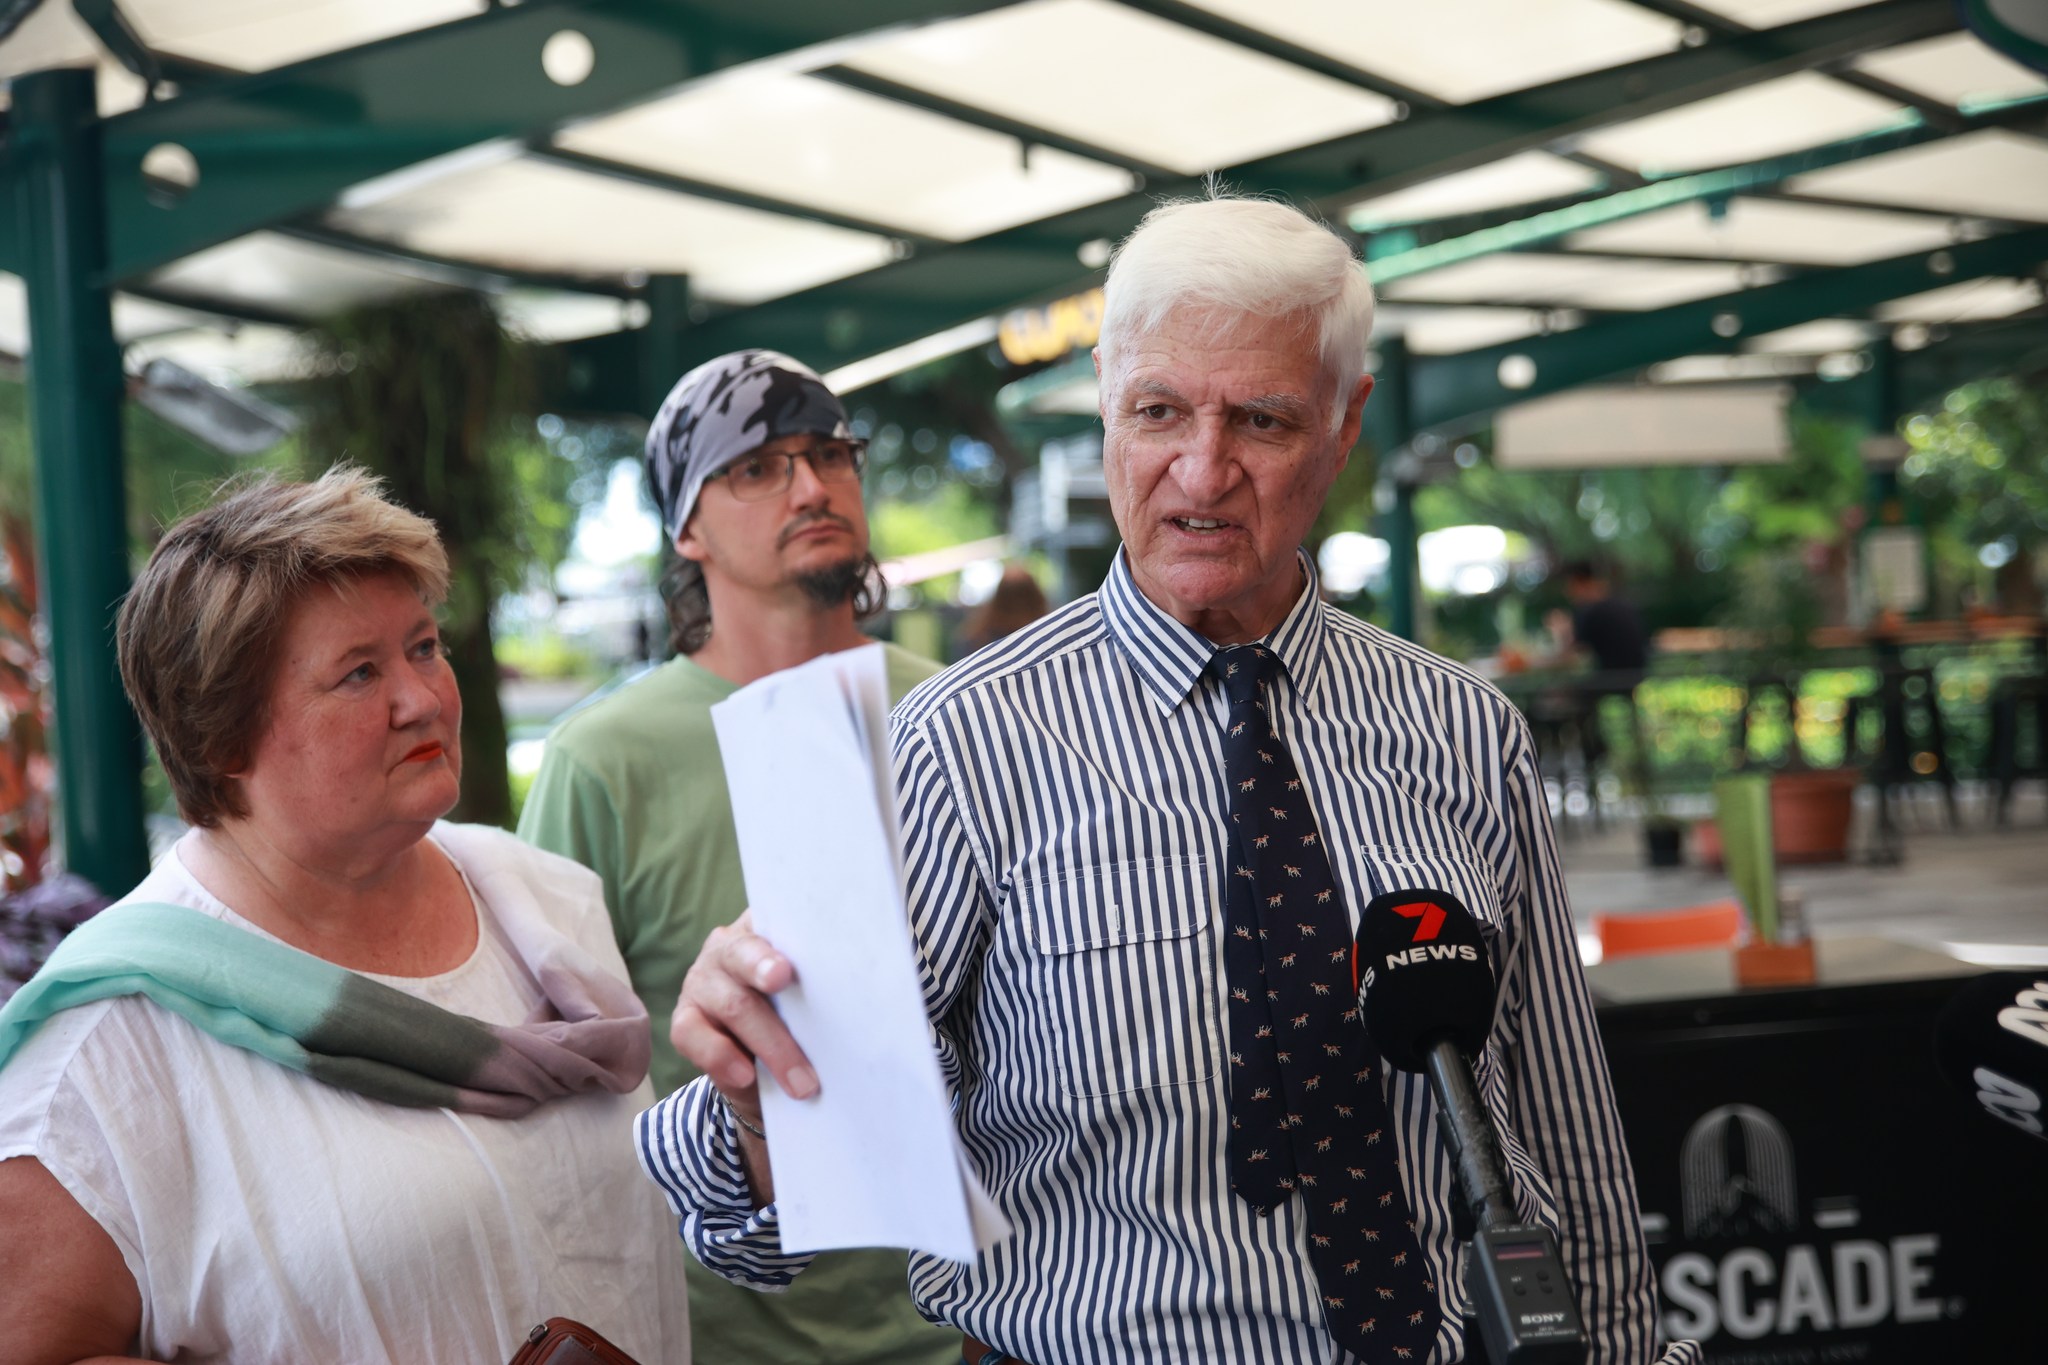 Bob Katter: Thank you to everyone who filed a submission opposing the Chalumb…